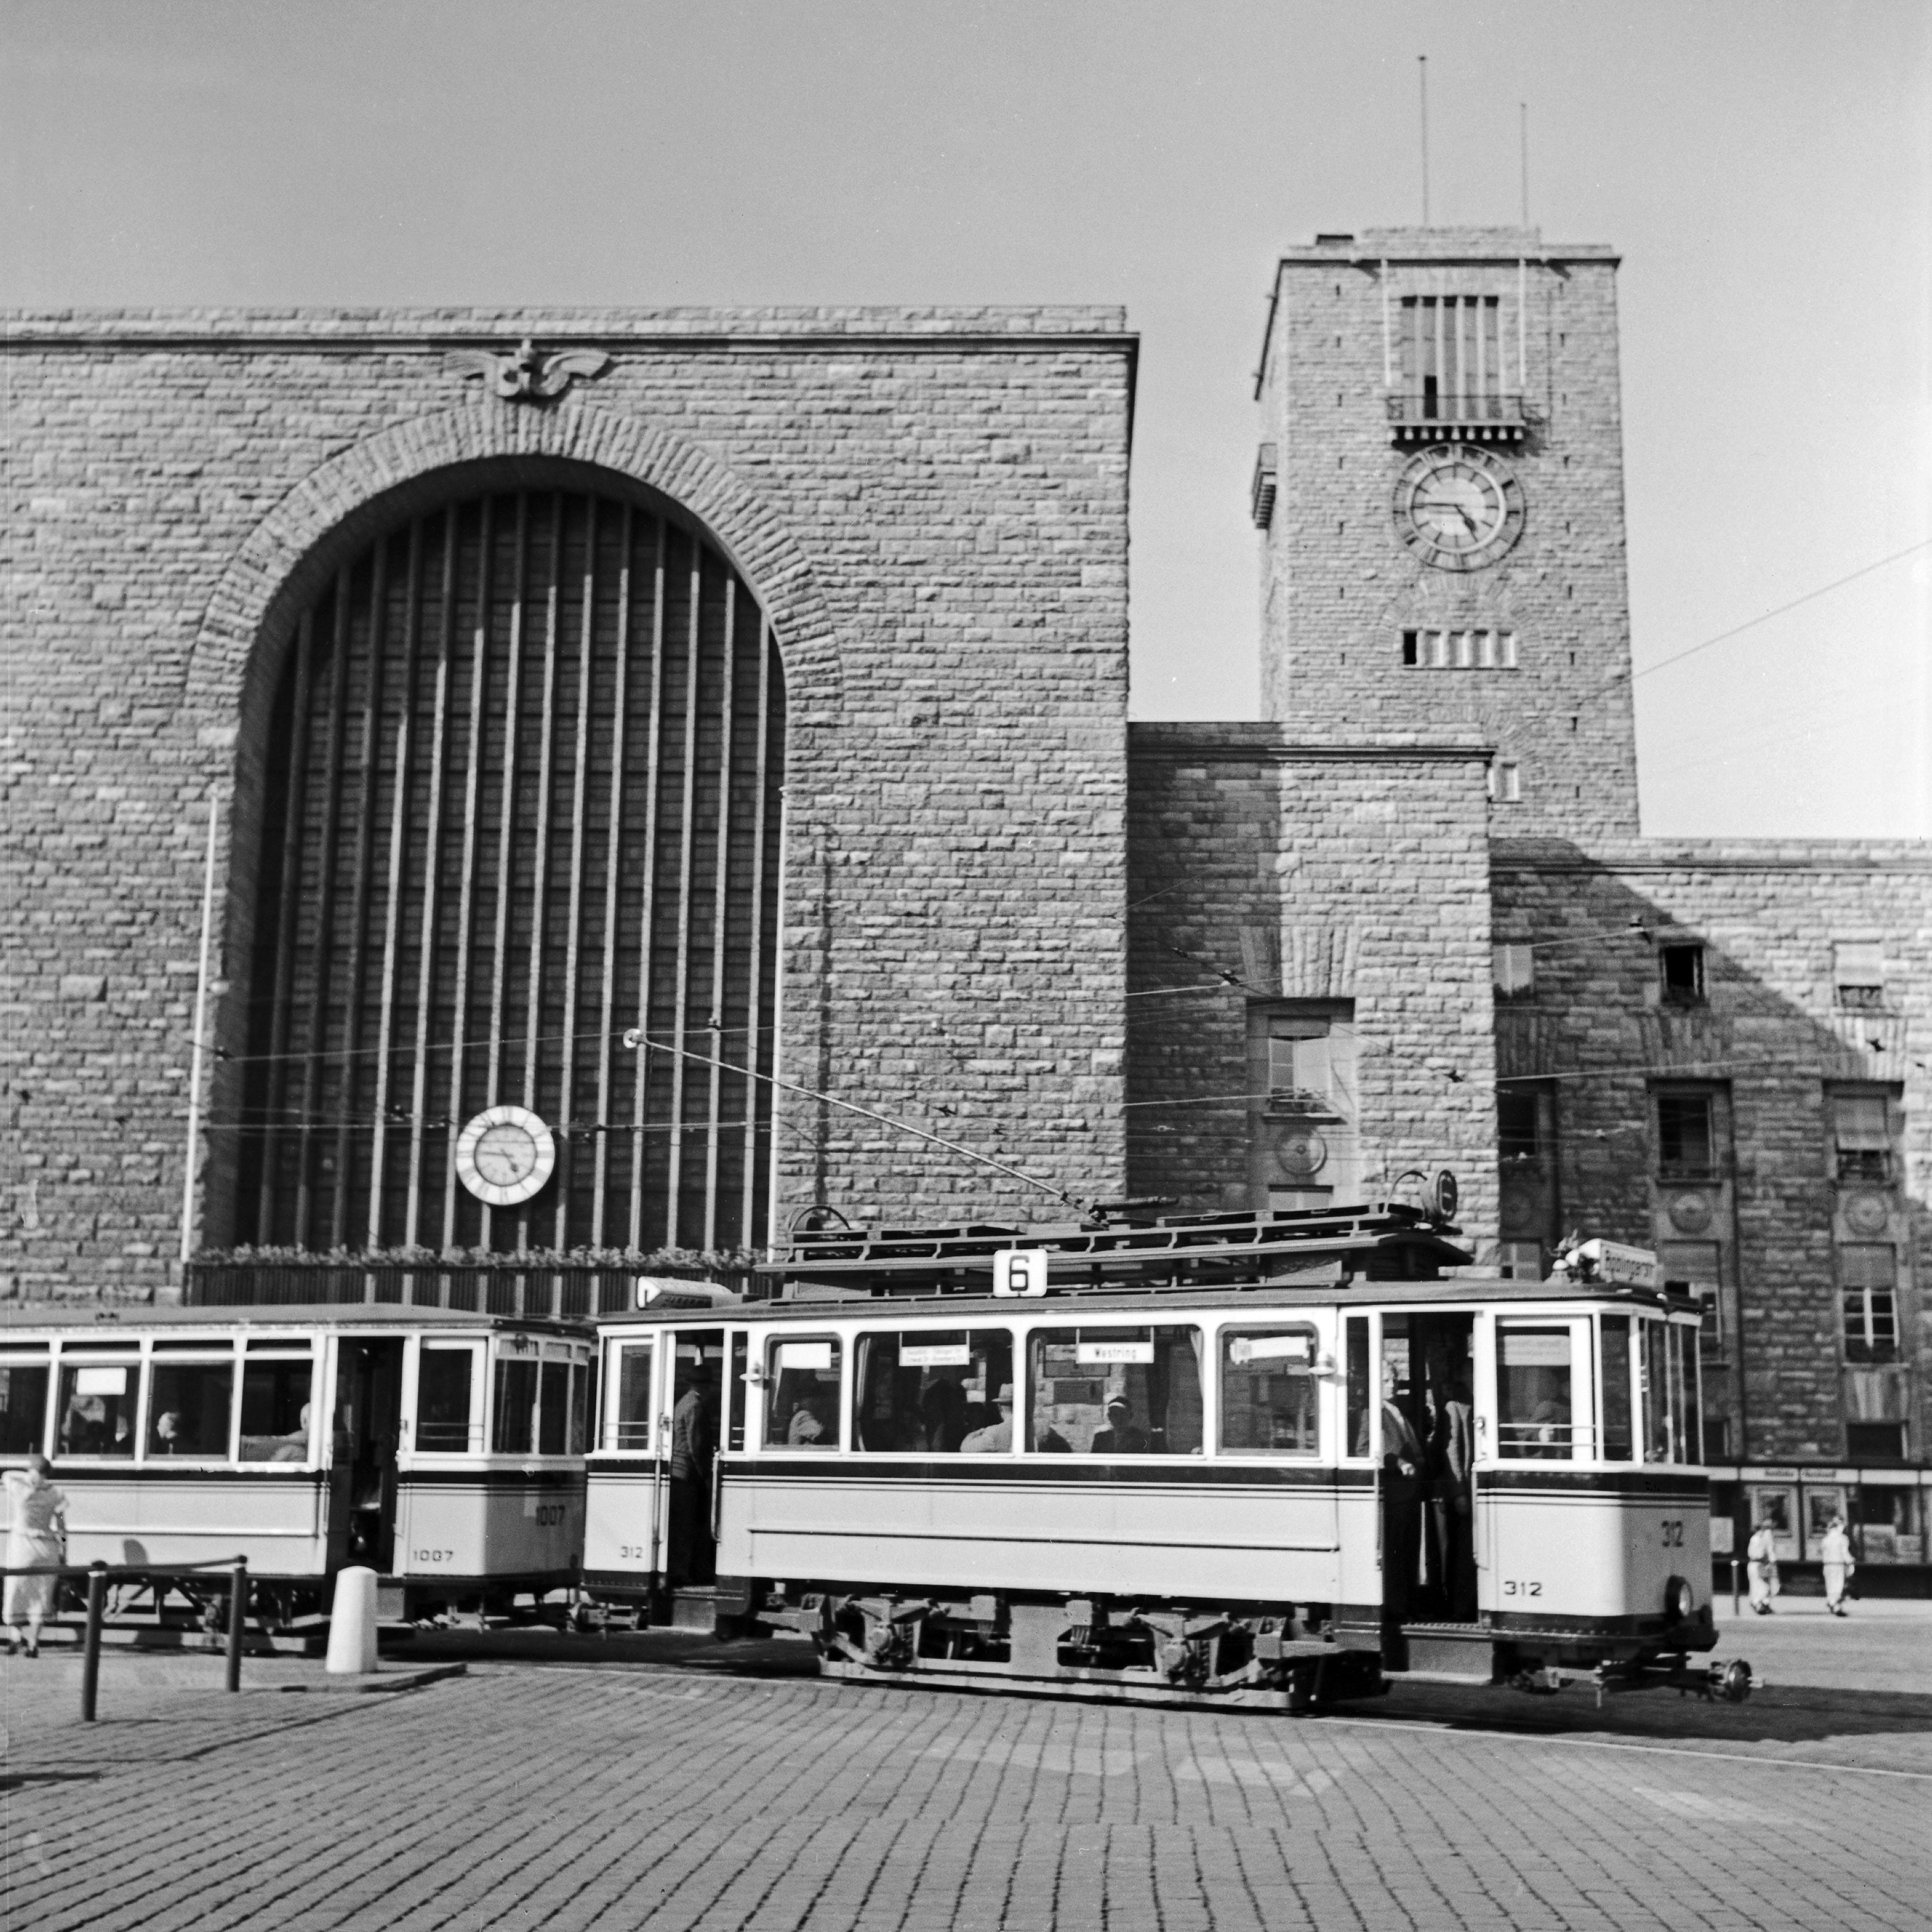 Karl Heinrich Lämmel Black and White Photograph - Tram line no. 6 in front of main station, Stuttgart Germany 1935, Printed Later